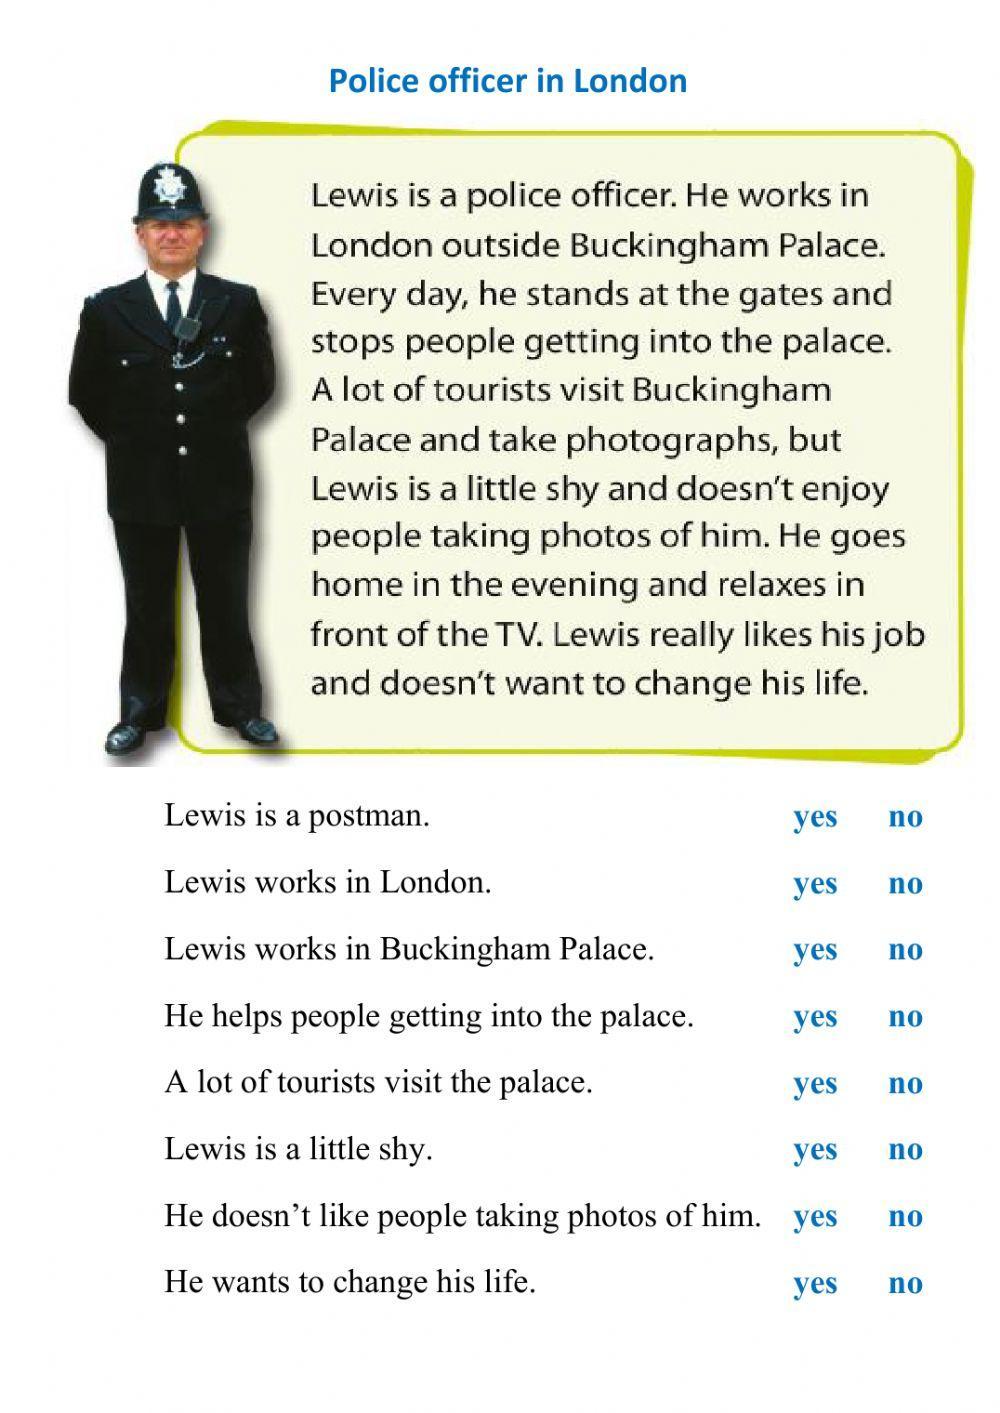 Reading - police officer in London 2